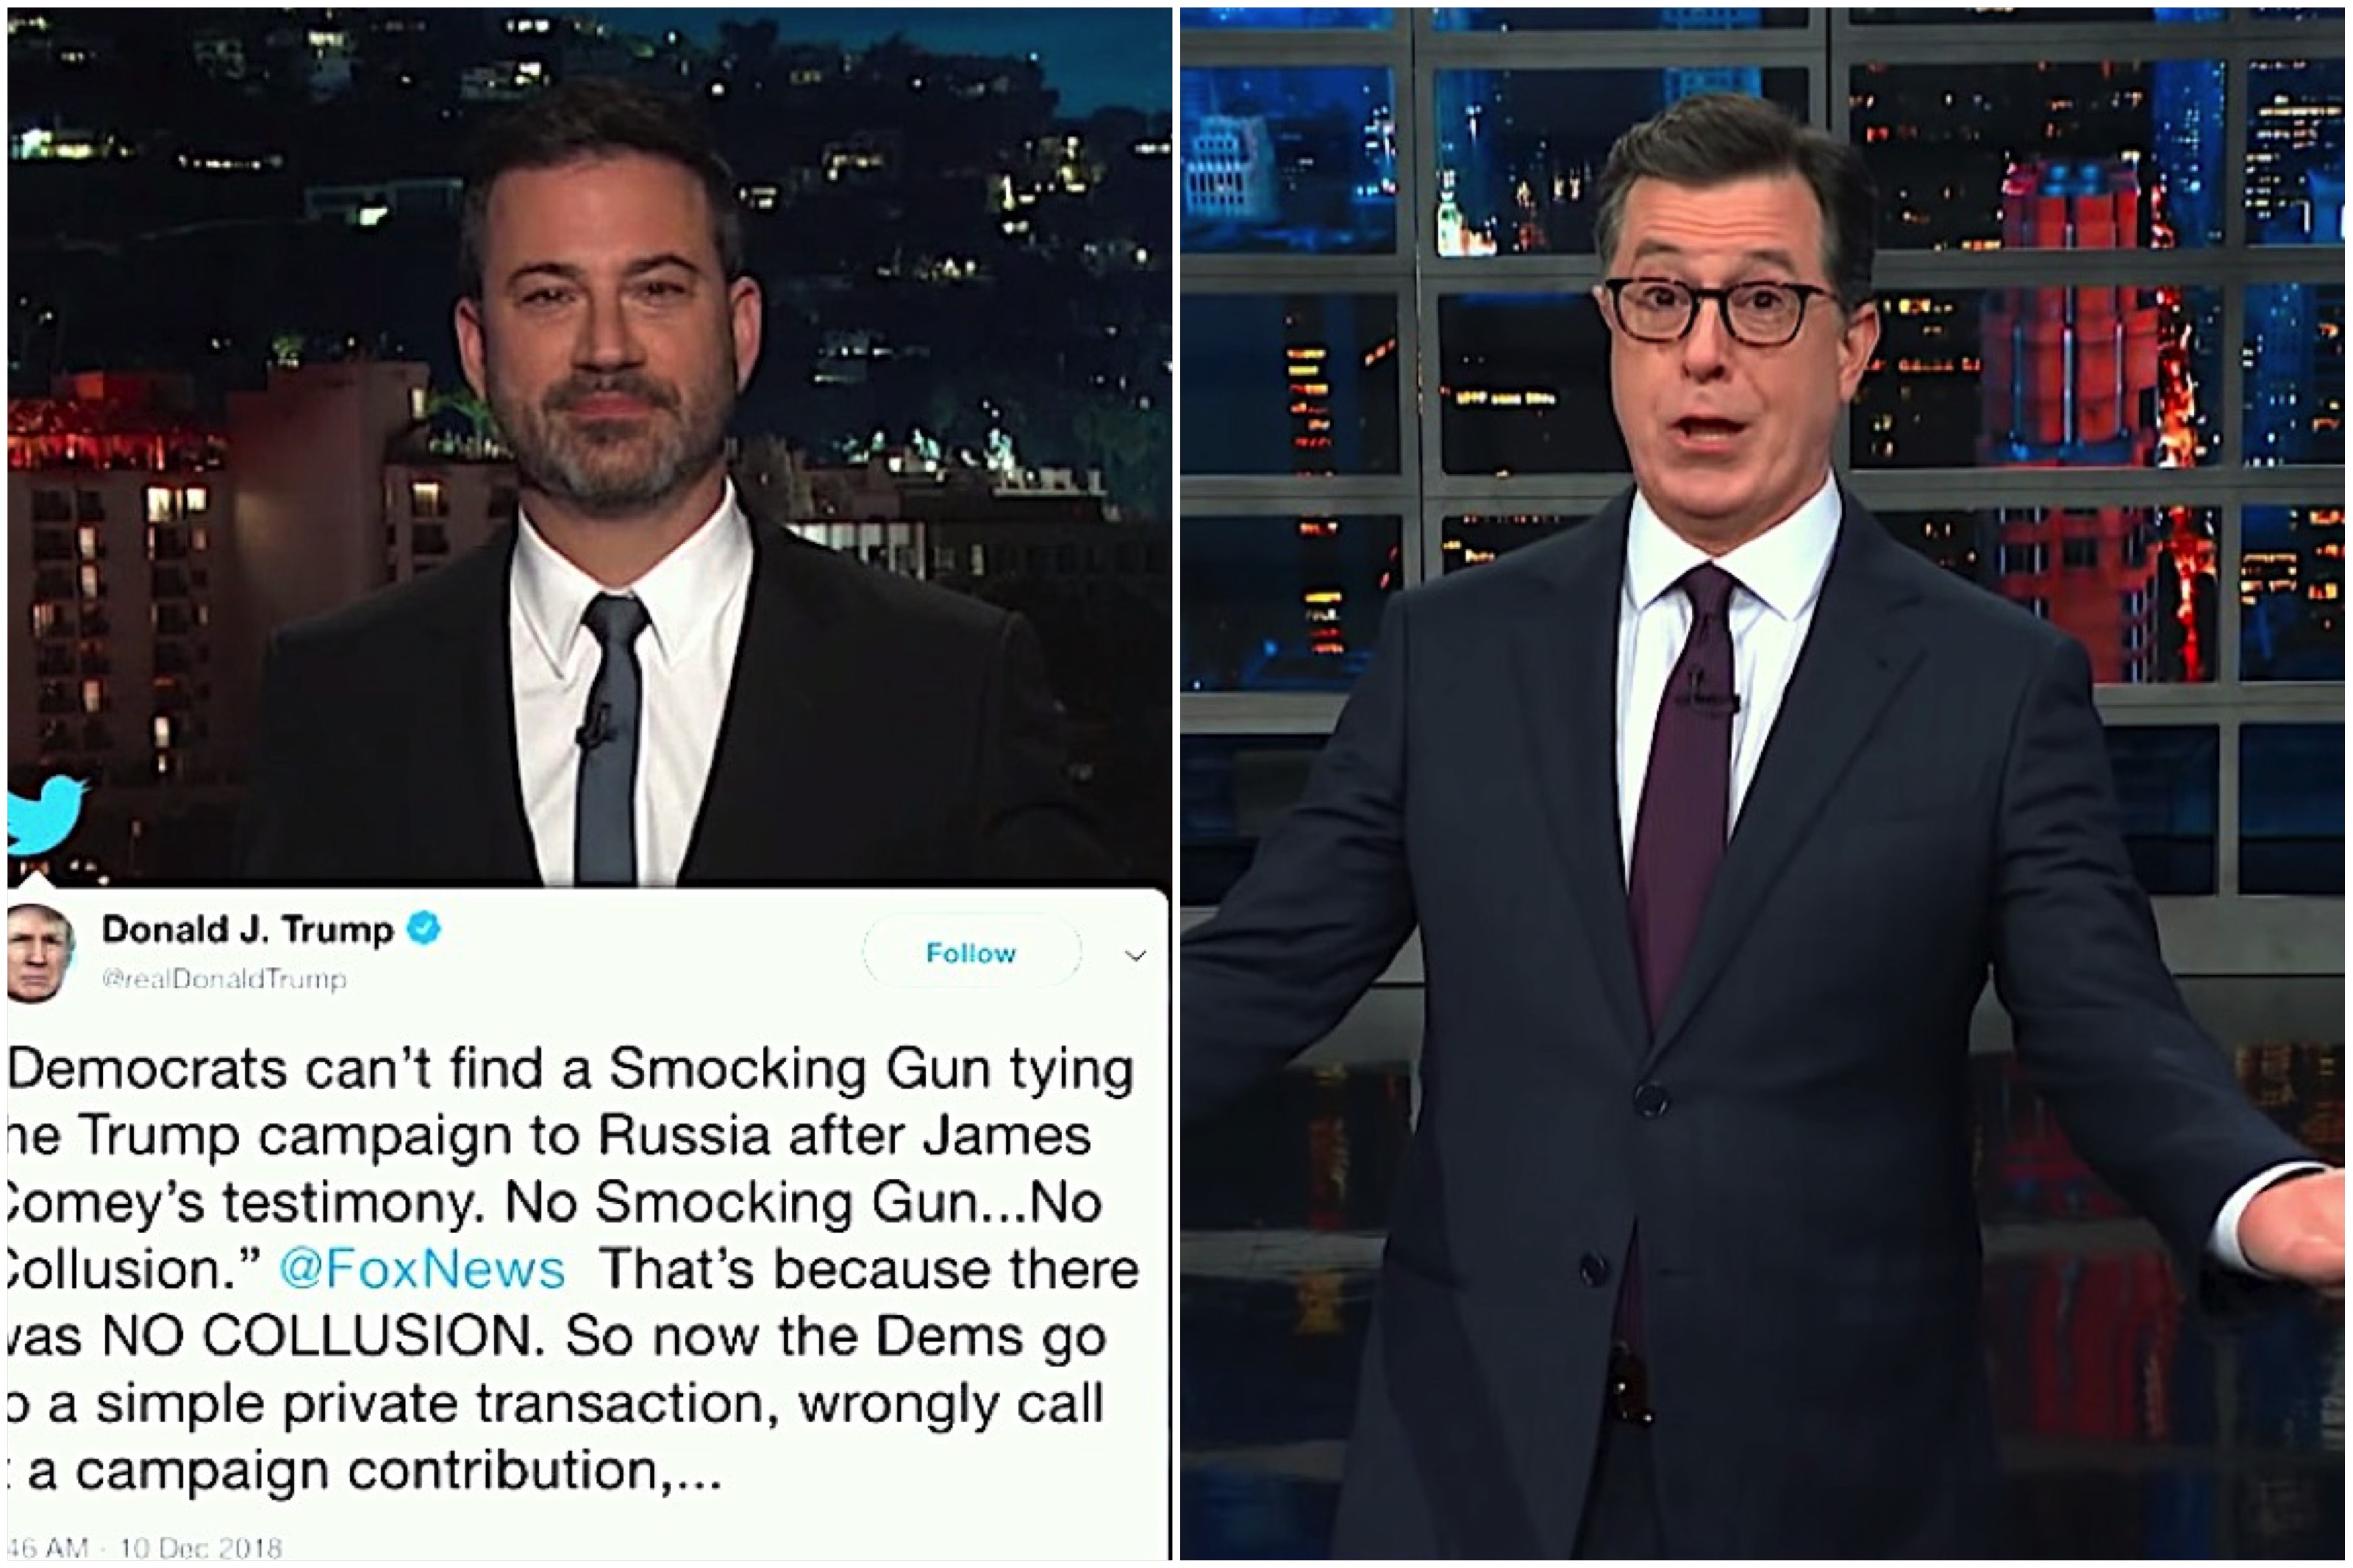 Jimmy Kimmel and Stephen Colbert on Trump&#039;s &quot;Smocking&quot; habit